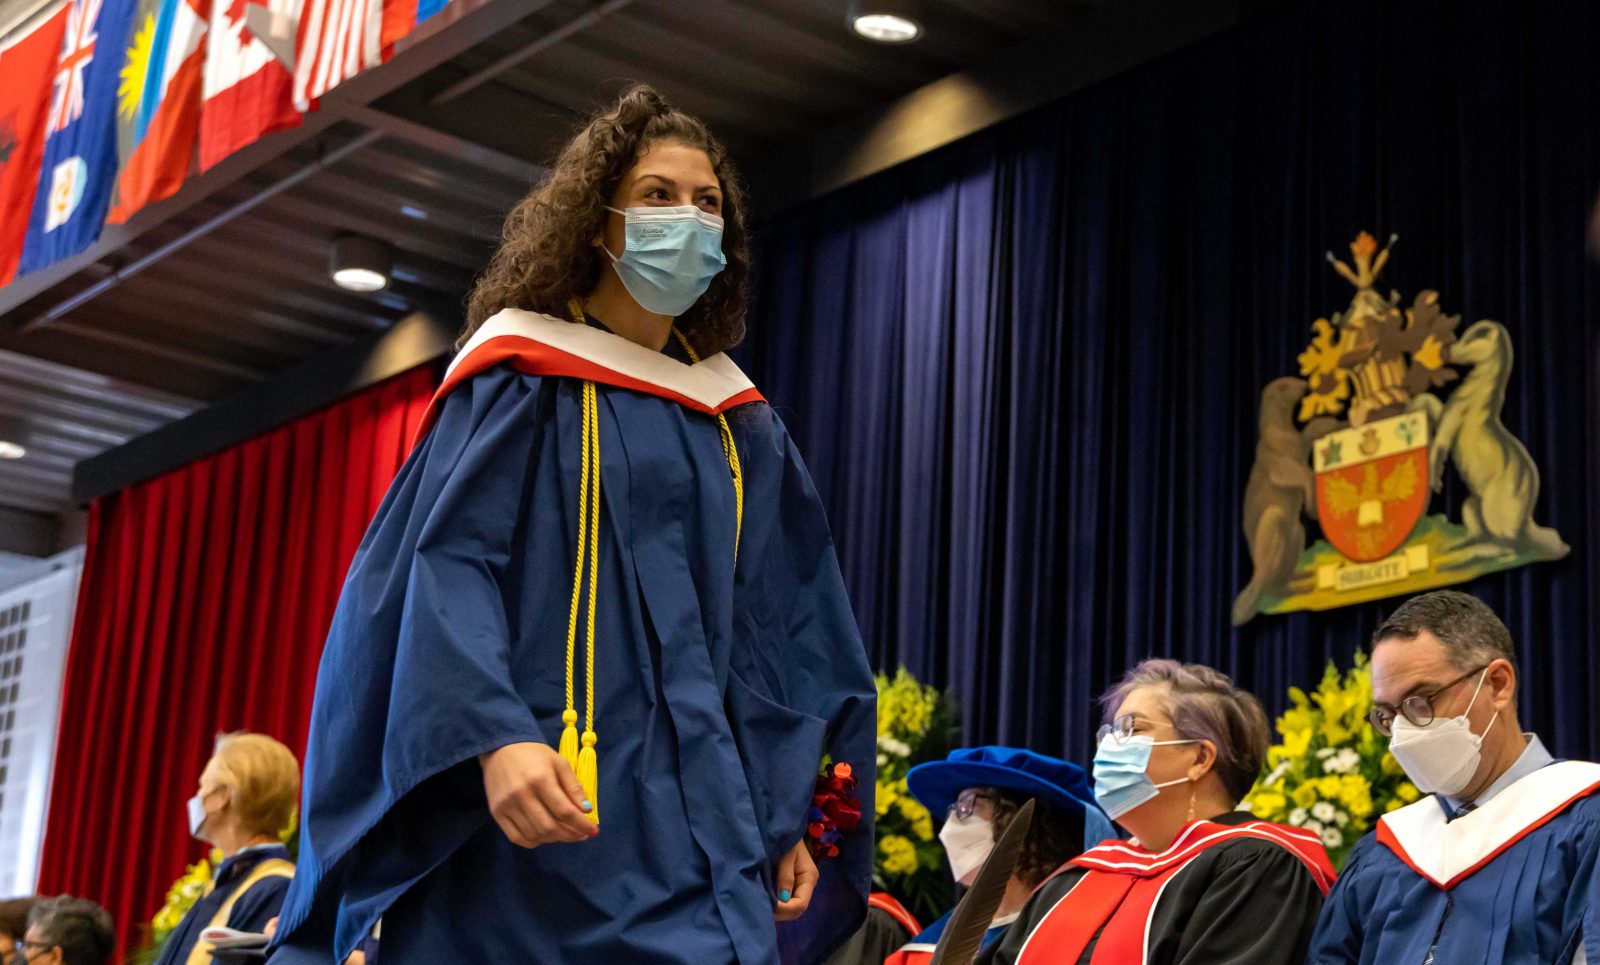 A woman walks across a stage wearing a graduationgown.